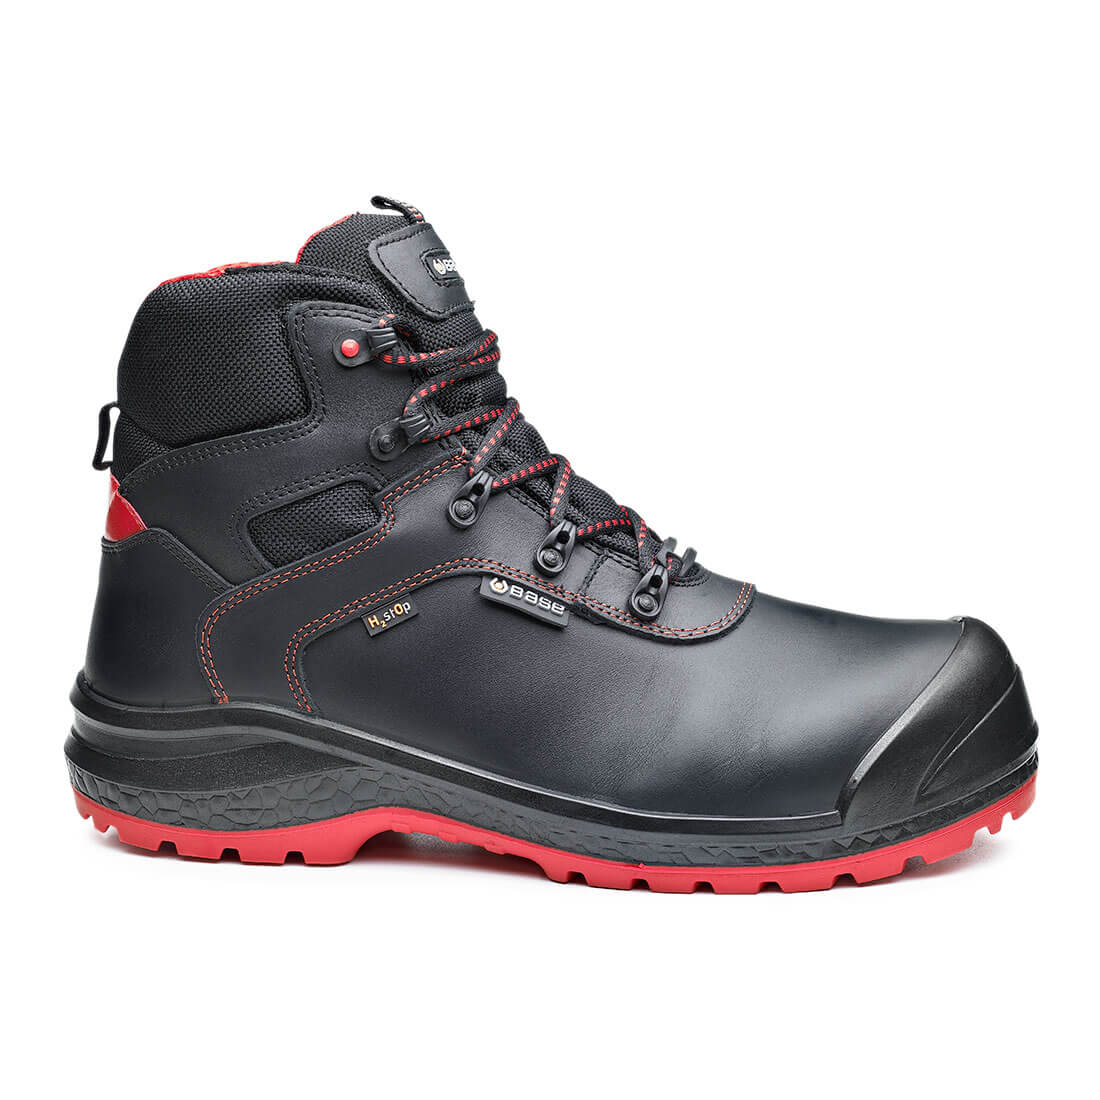 Base Be-Dry Mid Toe Cap Work Safety Boots Black 1#colour_black